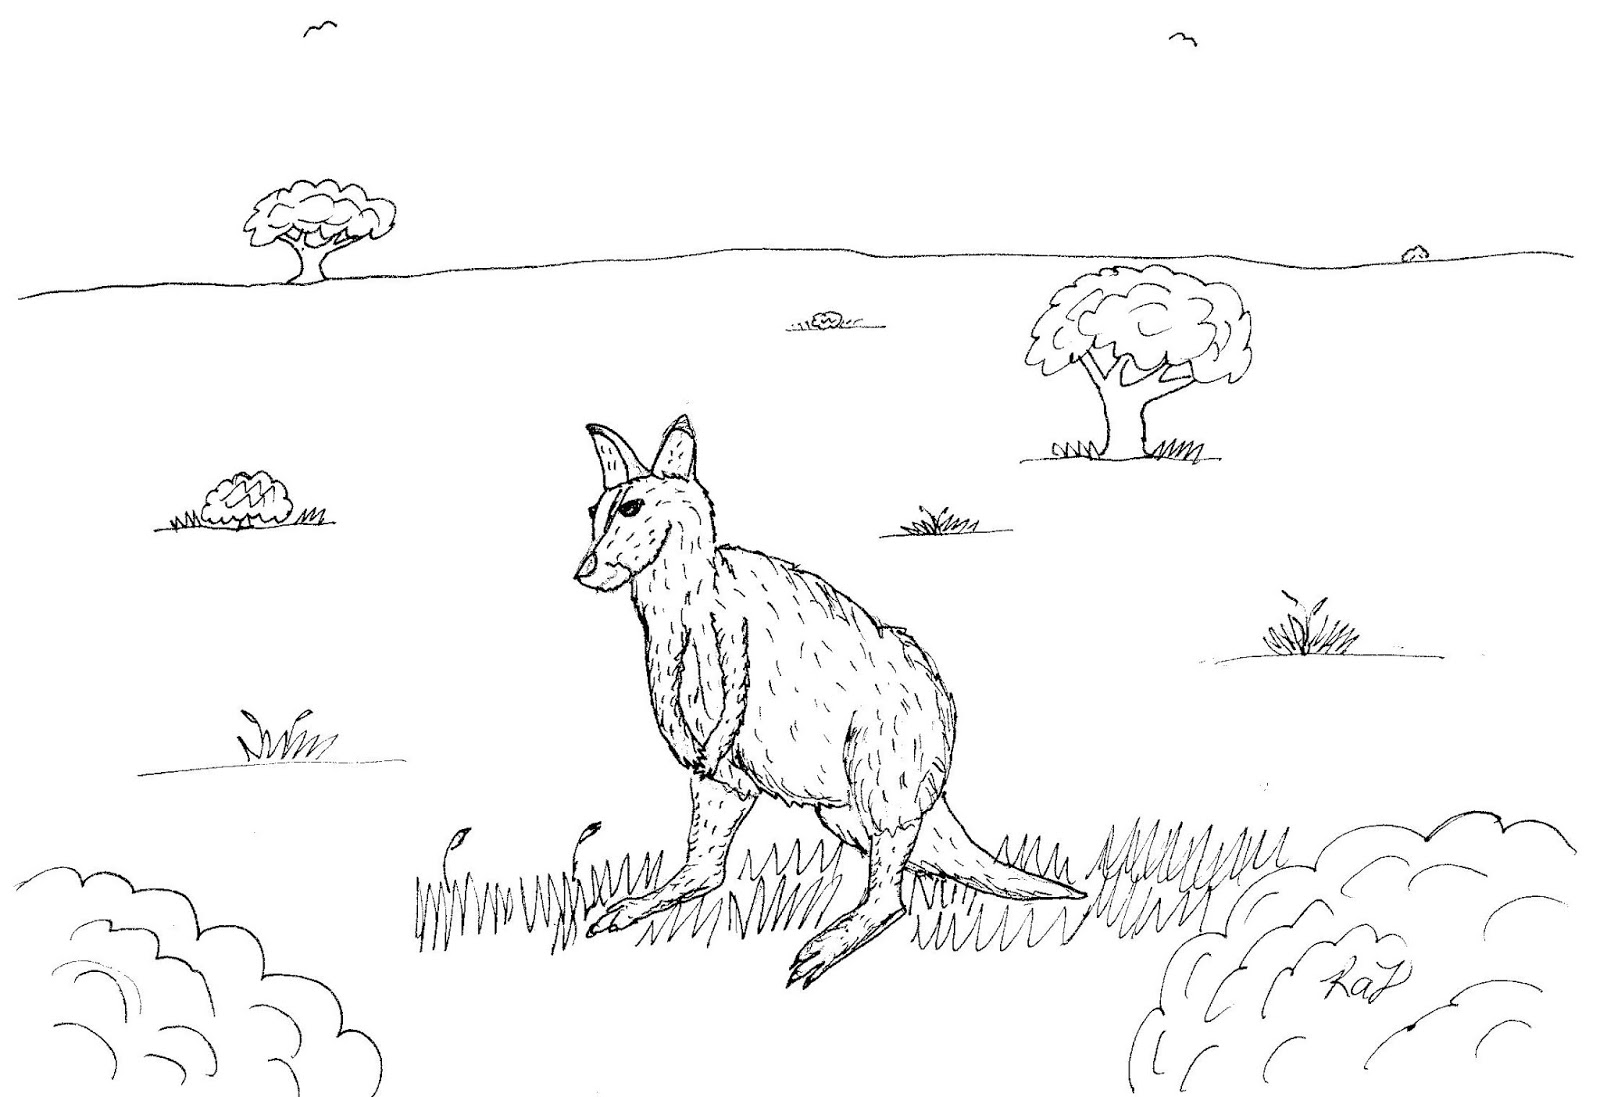 Robin's Great Coloring Pages: Wallaby